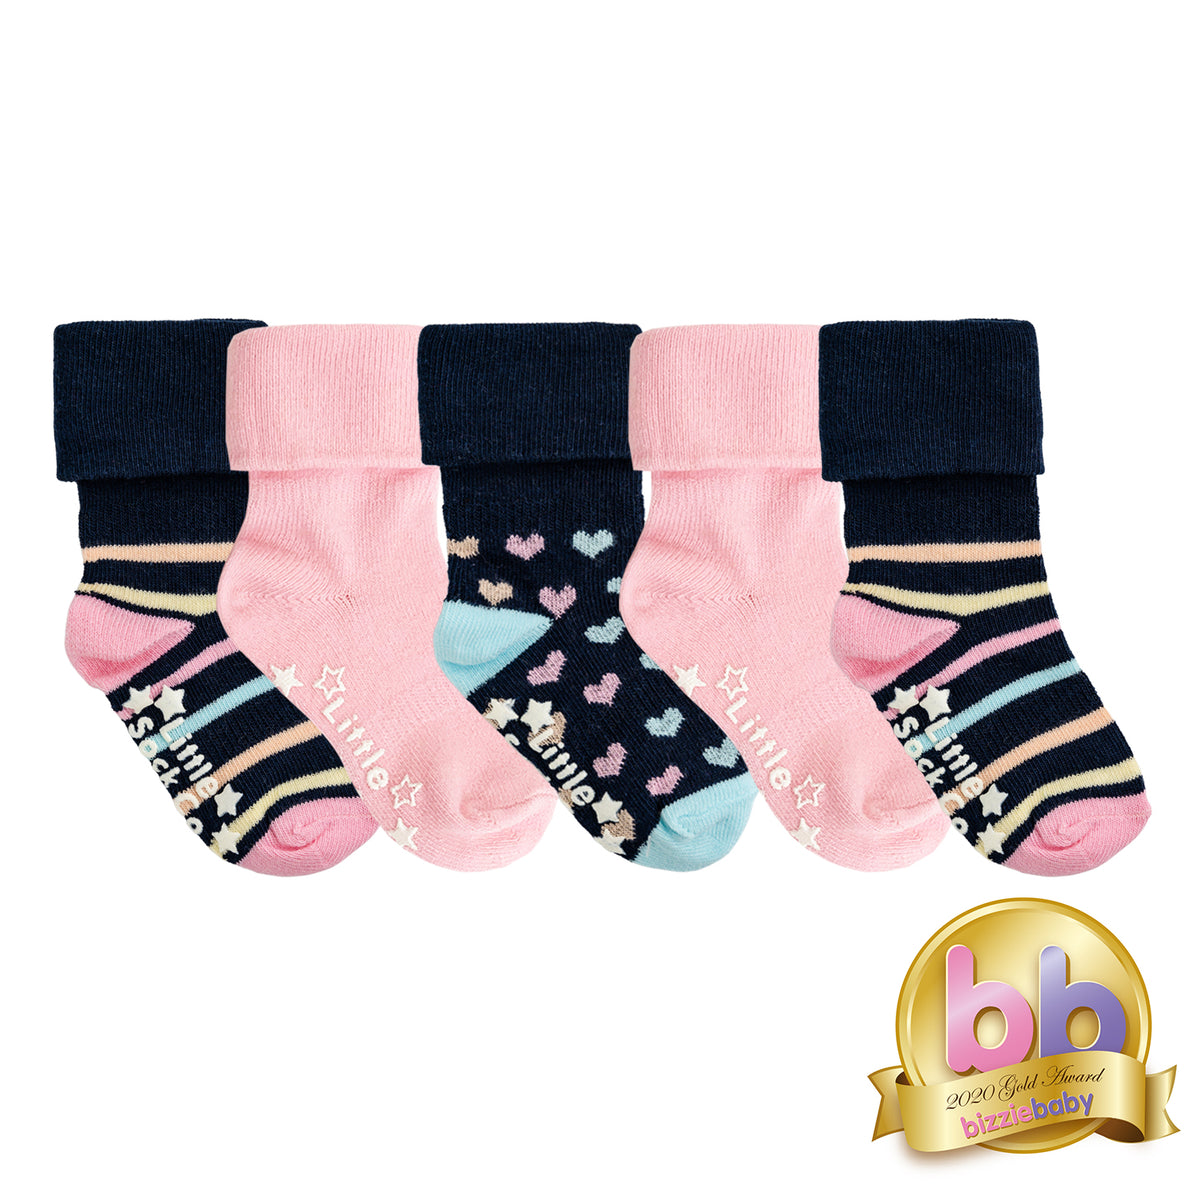 OUTLET - Non-Slip Stay On Baby and Toddler Socks - 5 Pack in Navy Rainbow, Navy hearts & Pink